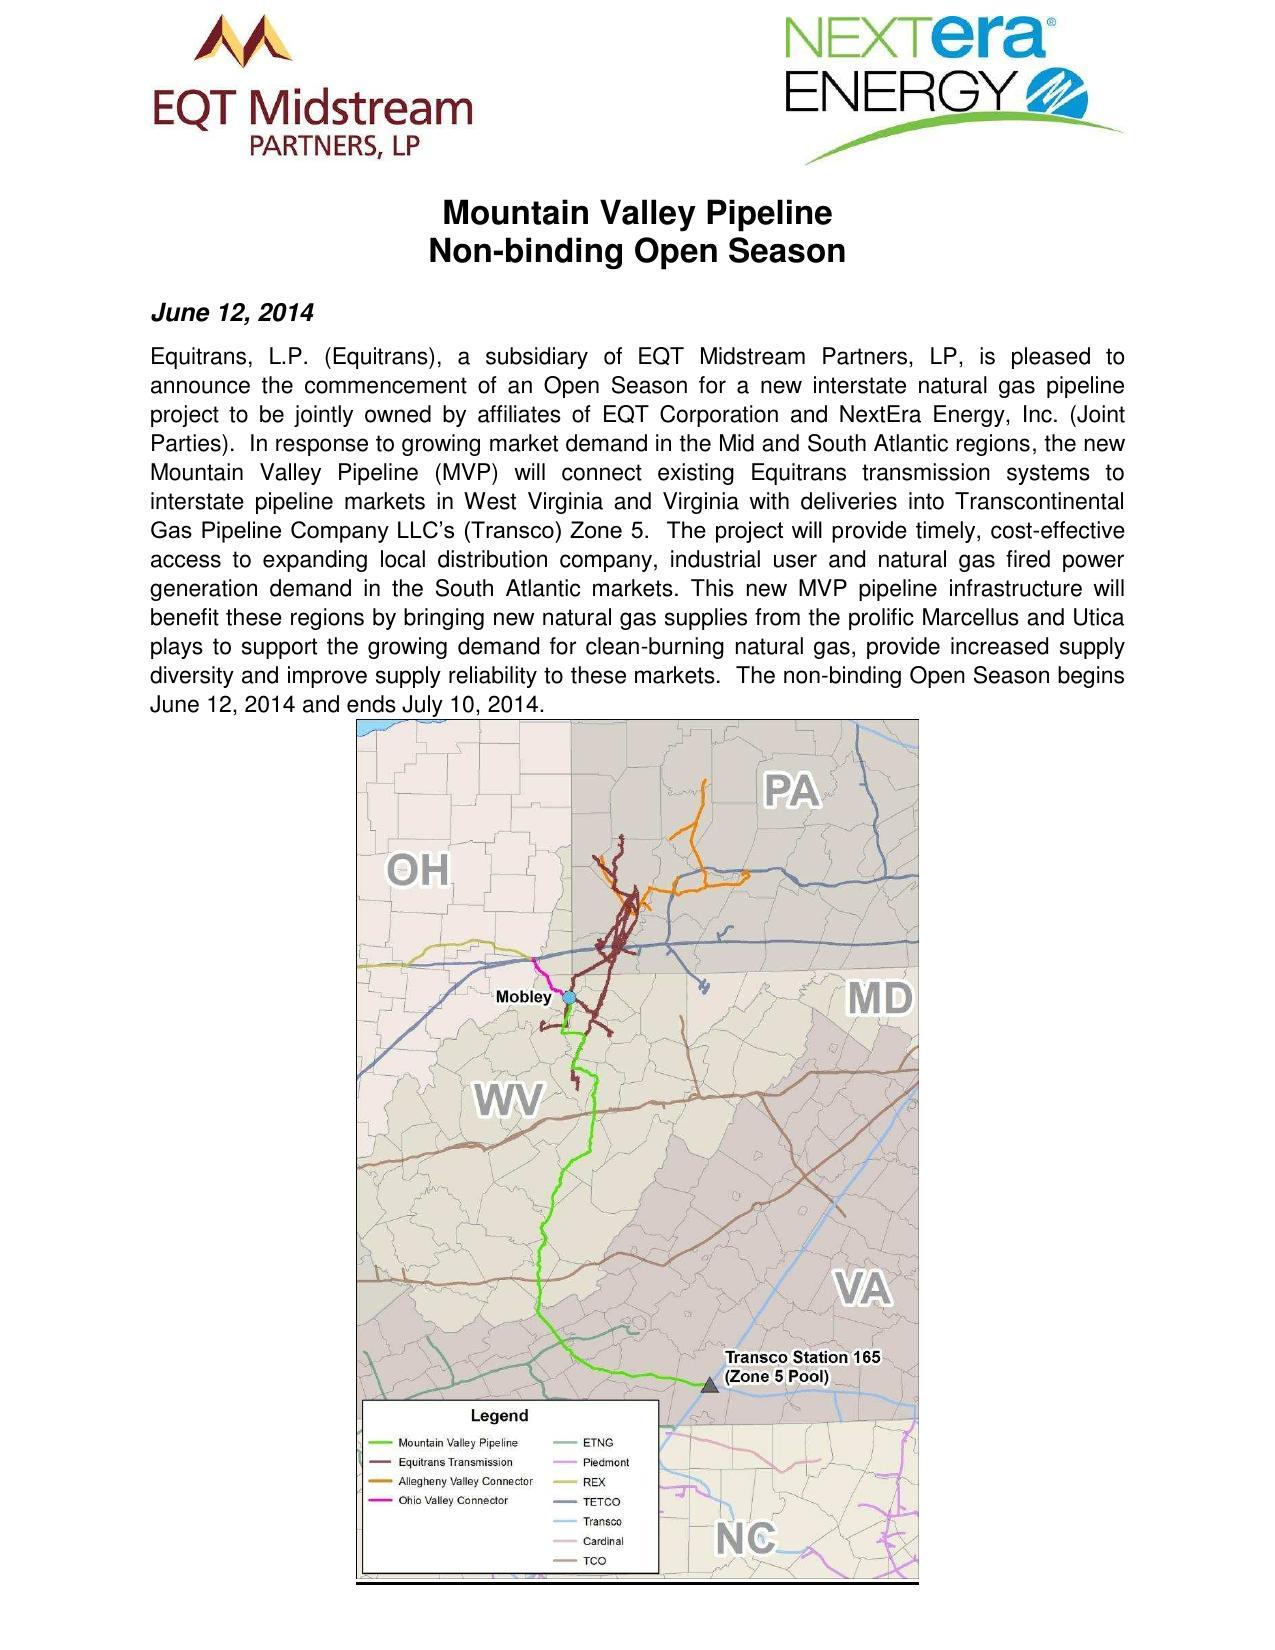 1275x1650 Introduction and map, in Mountain Valley Pipeline Non-binding Open Season, by EQT Midstream Partners, LLP and NextEra Energy, for SpectraBusters.org, 12 June 2014